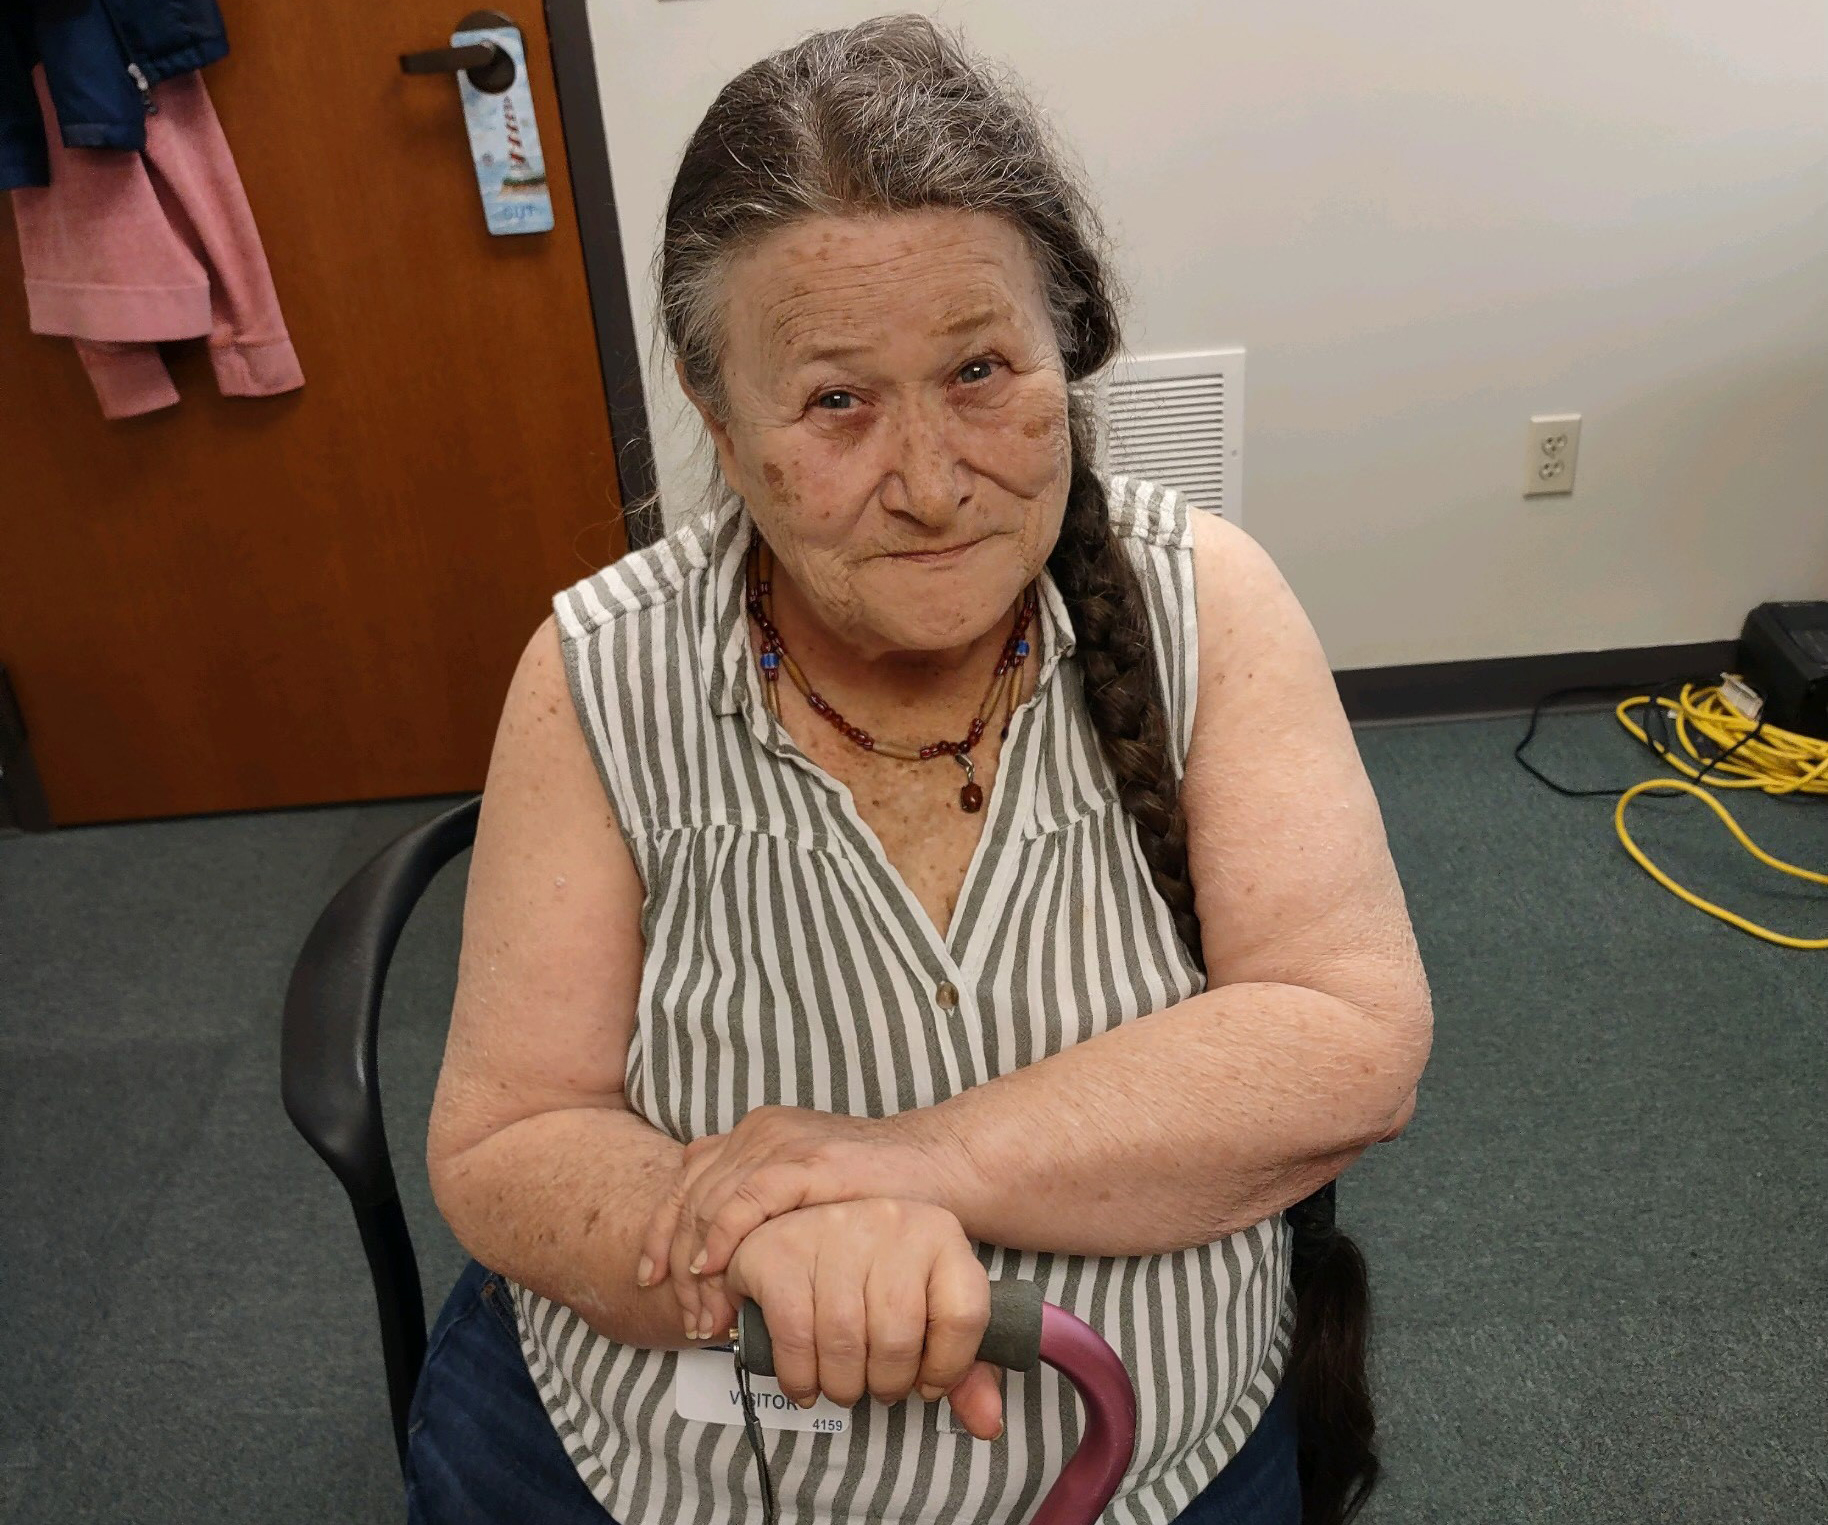 PHOTO: Susan Prahl Meachum, a 64-year-old from rural Virginia, said she will "lose everything" if there is no deal to raise the debt limit in time.